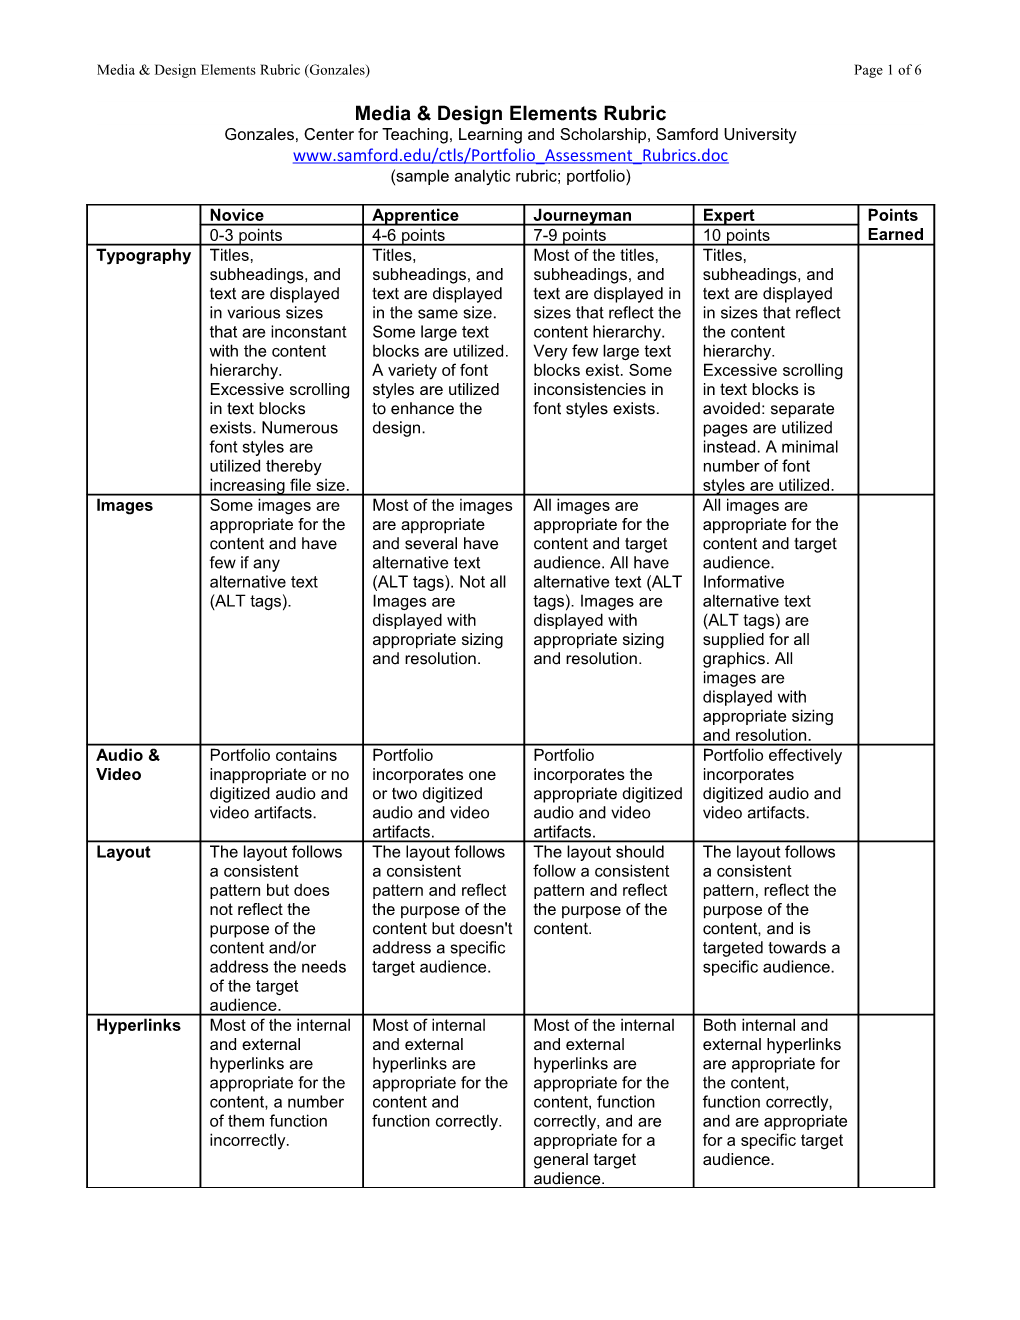 Media & Design Elements Rubric (Gonzales)Page 1 of 6